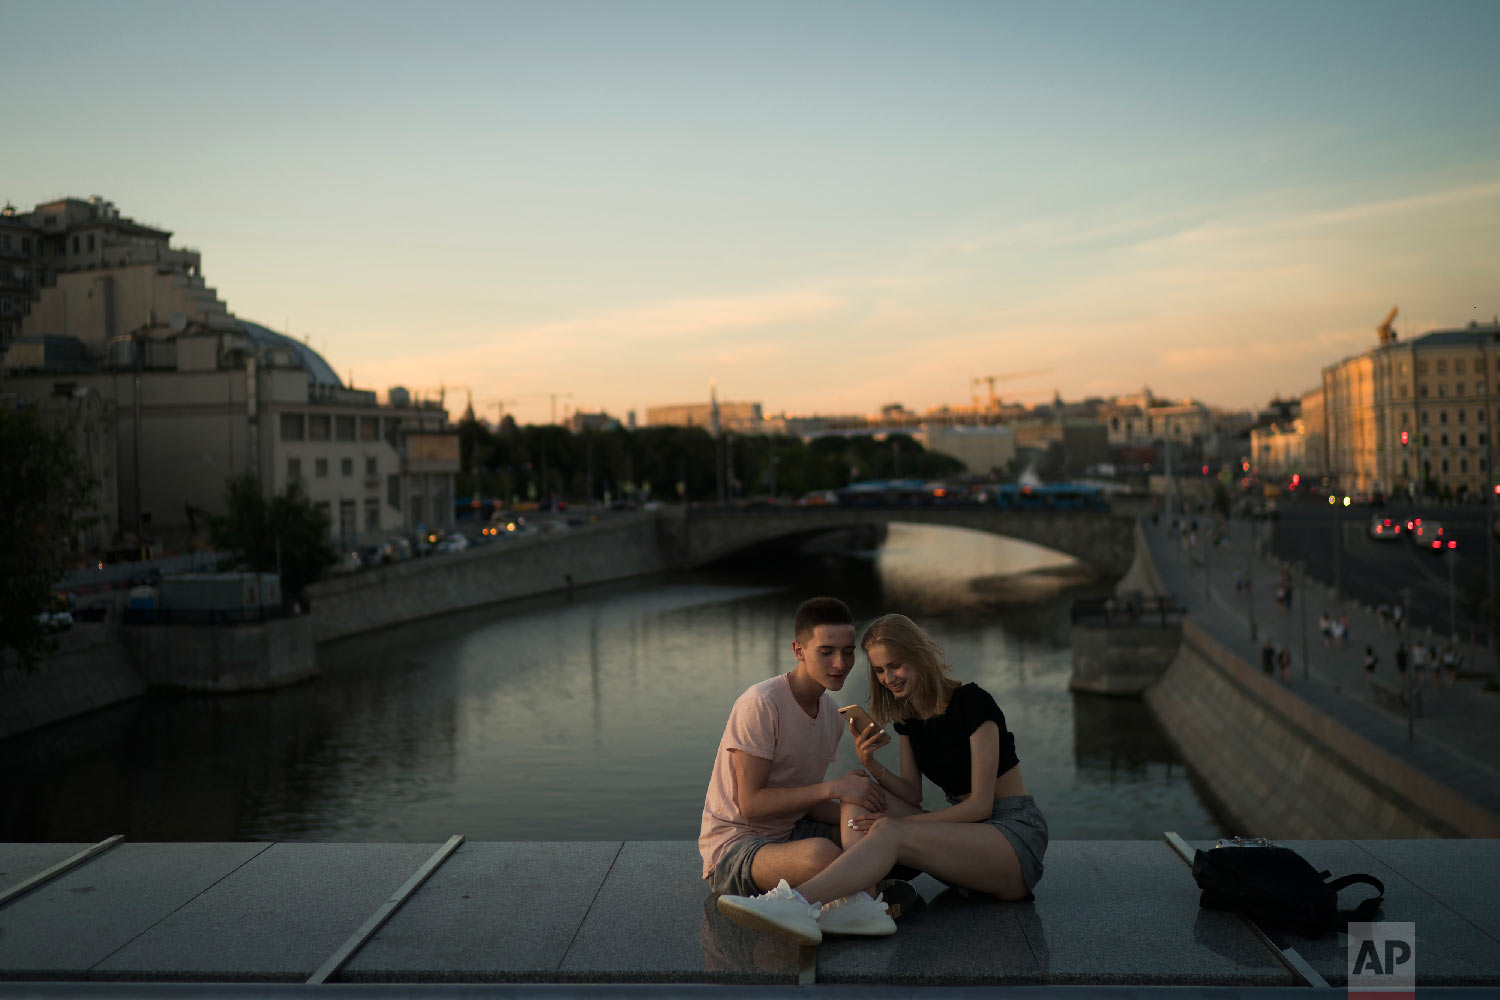  A young couple sit on a bridge as the sun sets during the 2018 soccer World Cup in Moscow, Russia on June 26, 2018. (AP Photo/Felipe Dana) 